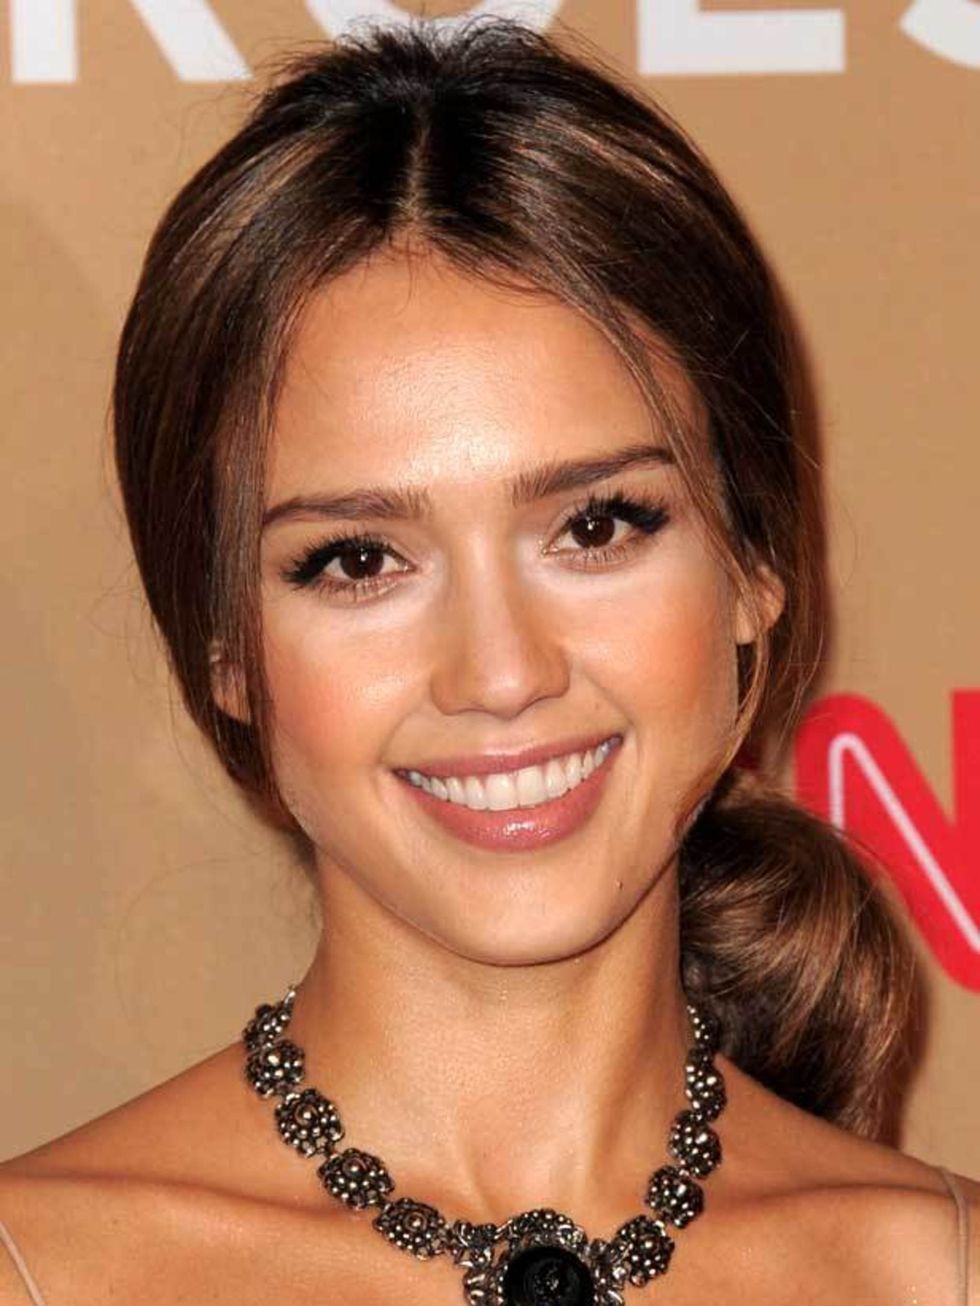 <p><a href="http://www.elleuk.com/starstyle/style-files/%28section%29/Jessica-Alba">Jessica Alba</a> adds a statement necklace to her <a href="http://www.elleuk.com/catwalk/collections/rachel-comey/spring-summer-2011/collection">Rachel Comey SS11</a> dres